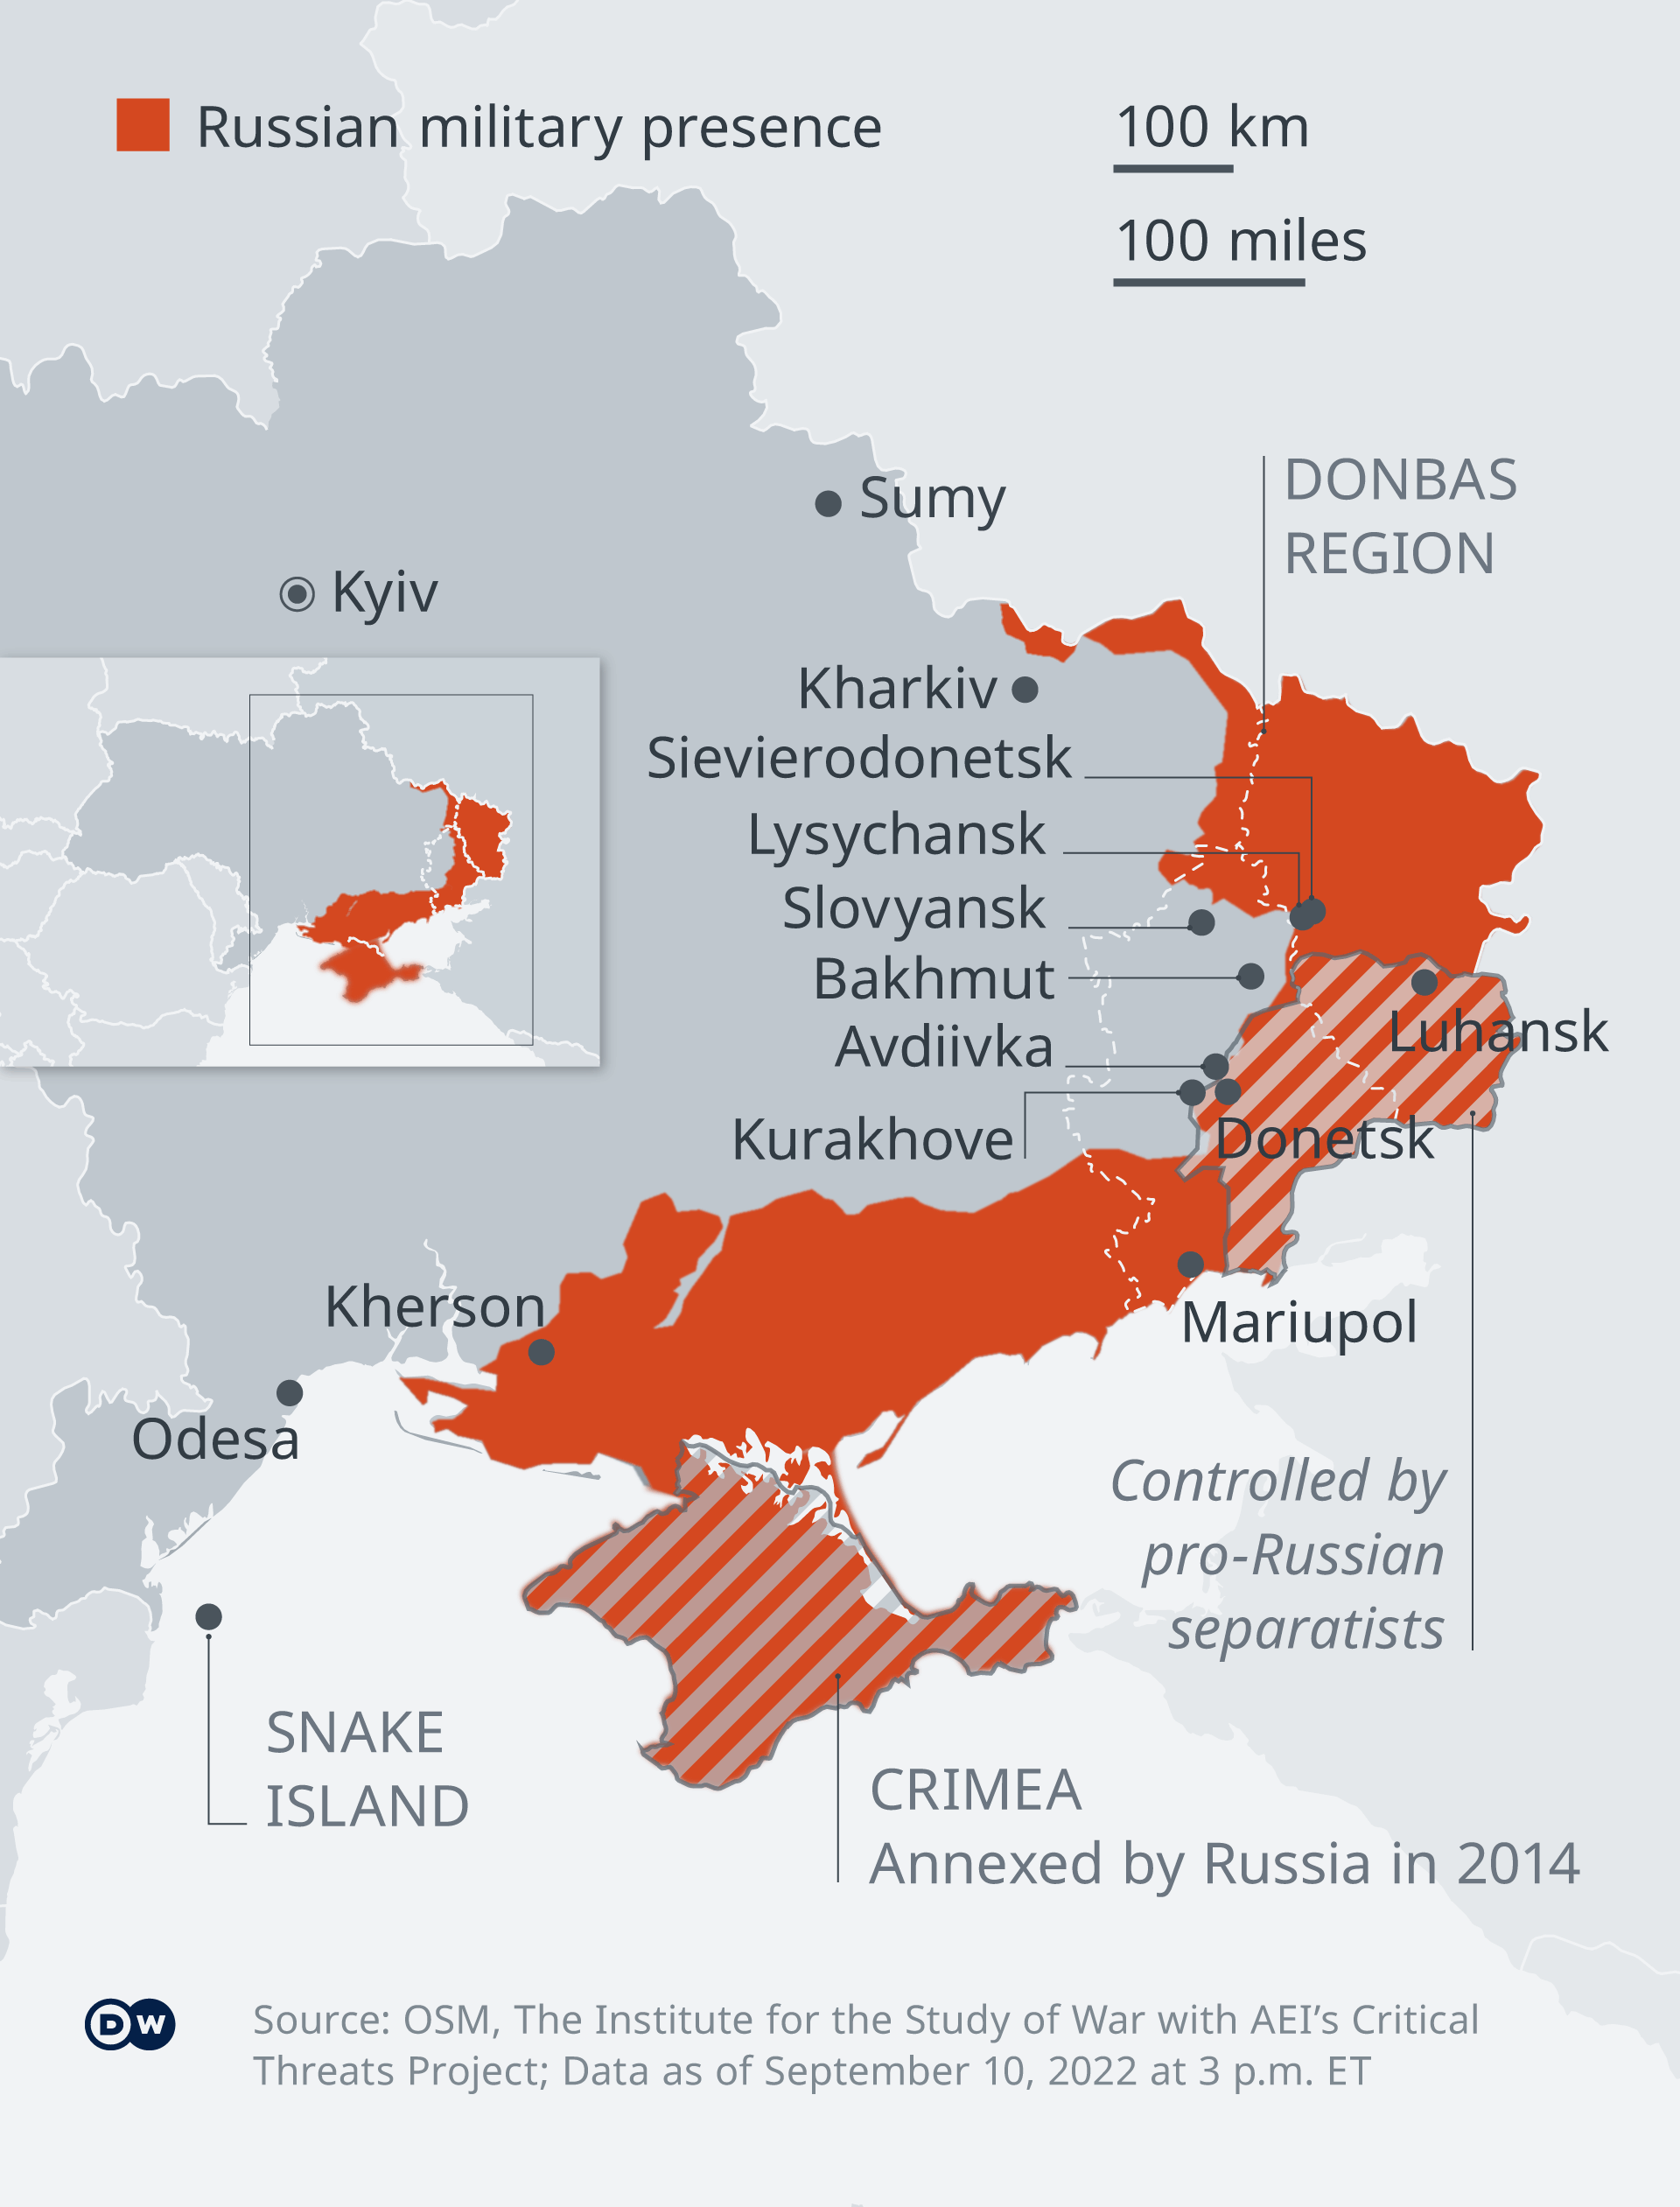 Map of Ukraine, with red shading in the east and south, indicating areas occupied by Russia or controlled by pro-Russia separatists